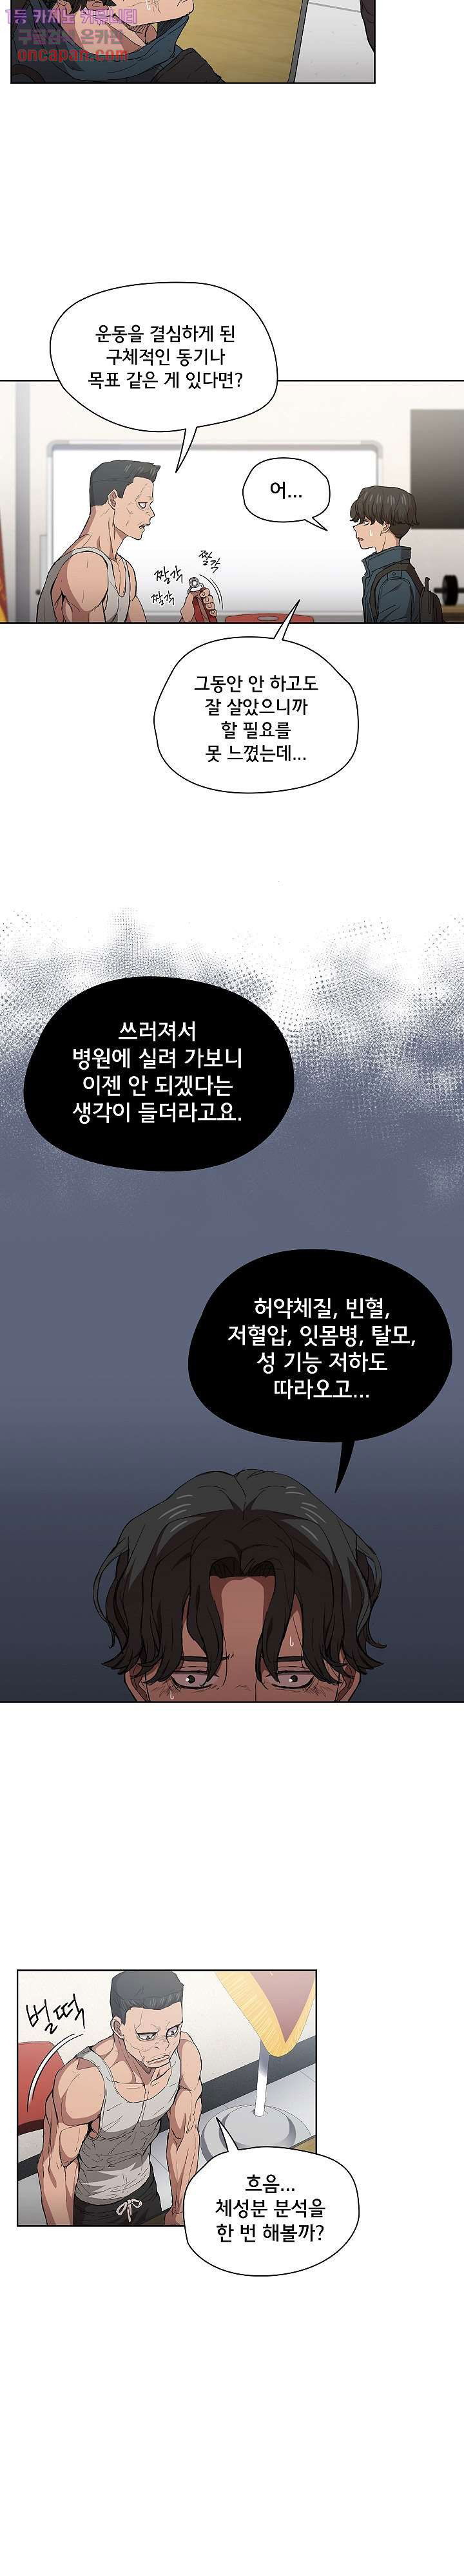 how-about-getting-lost-raw-chap-24-15